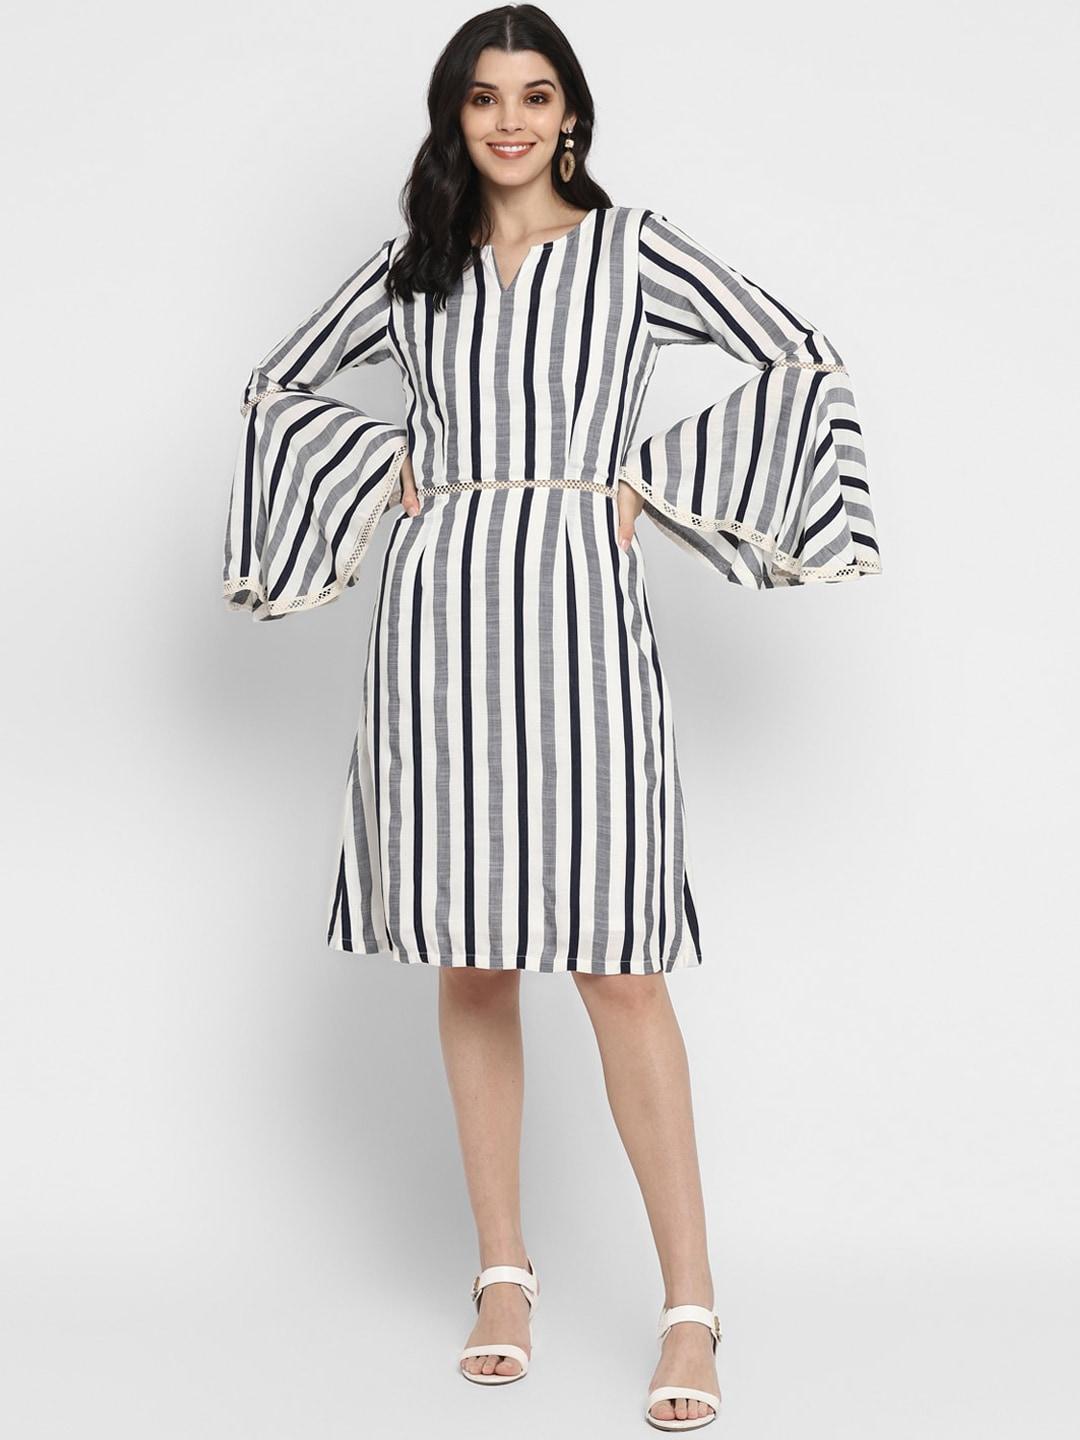 DEEBACO Navy Blue Striped Bell Sleeved Dress With Lace